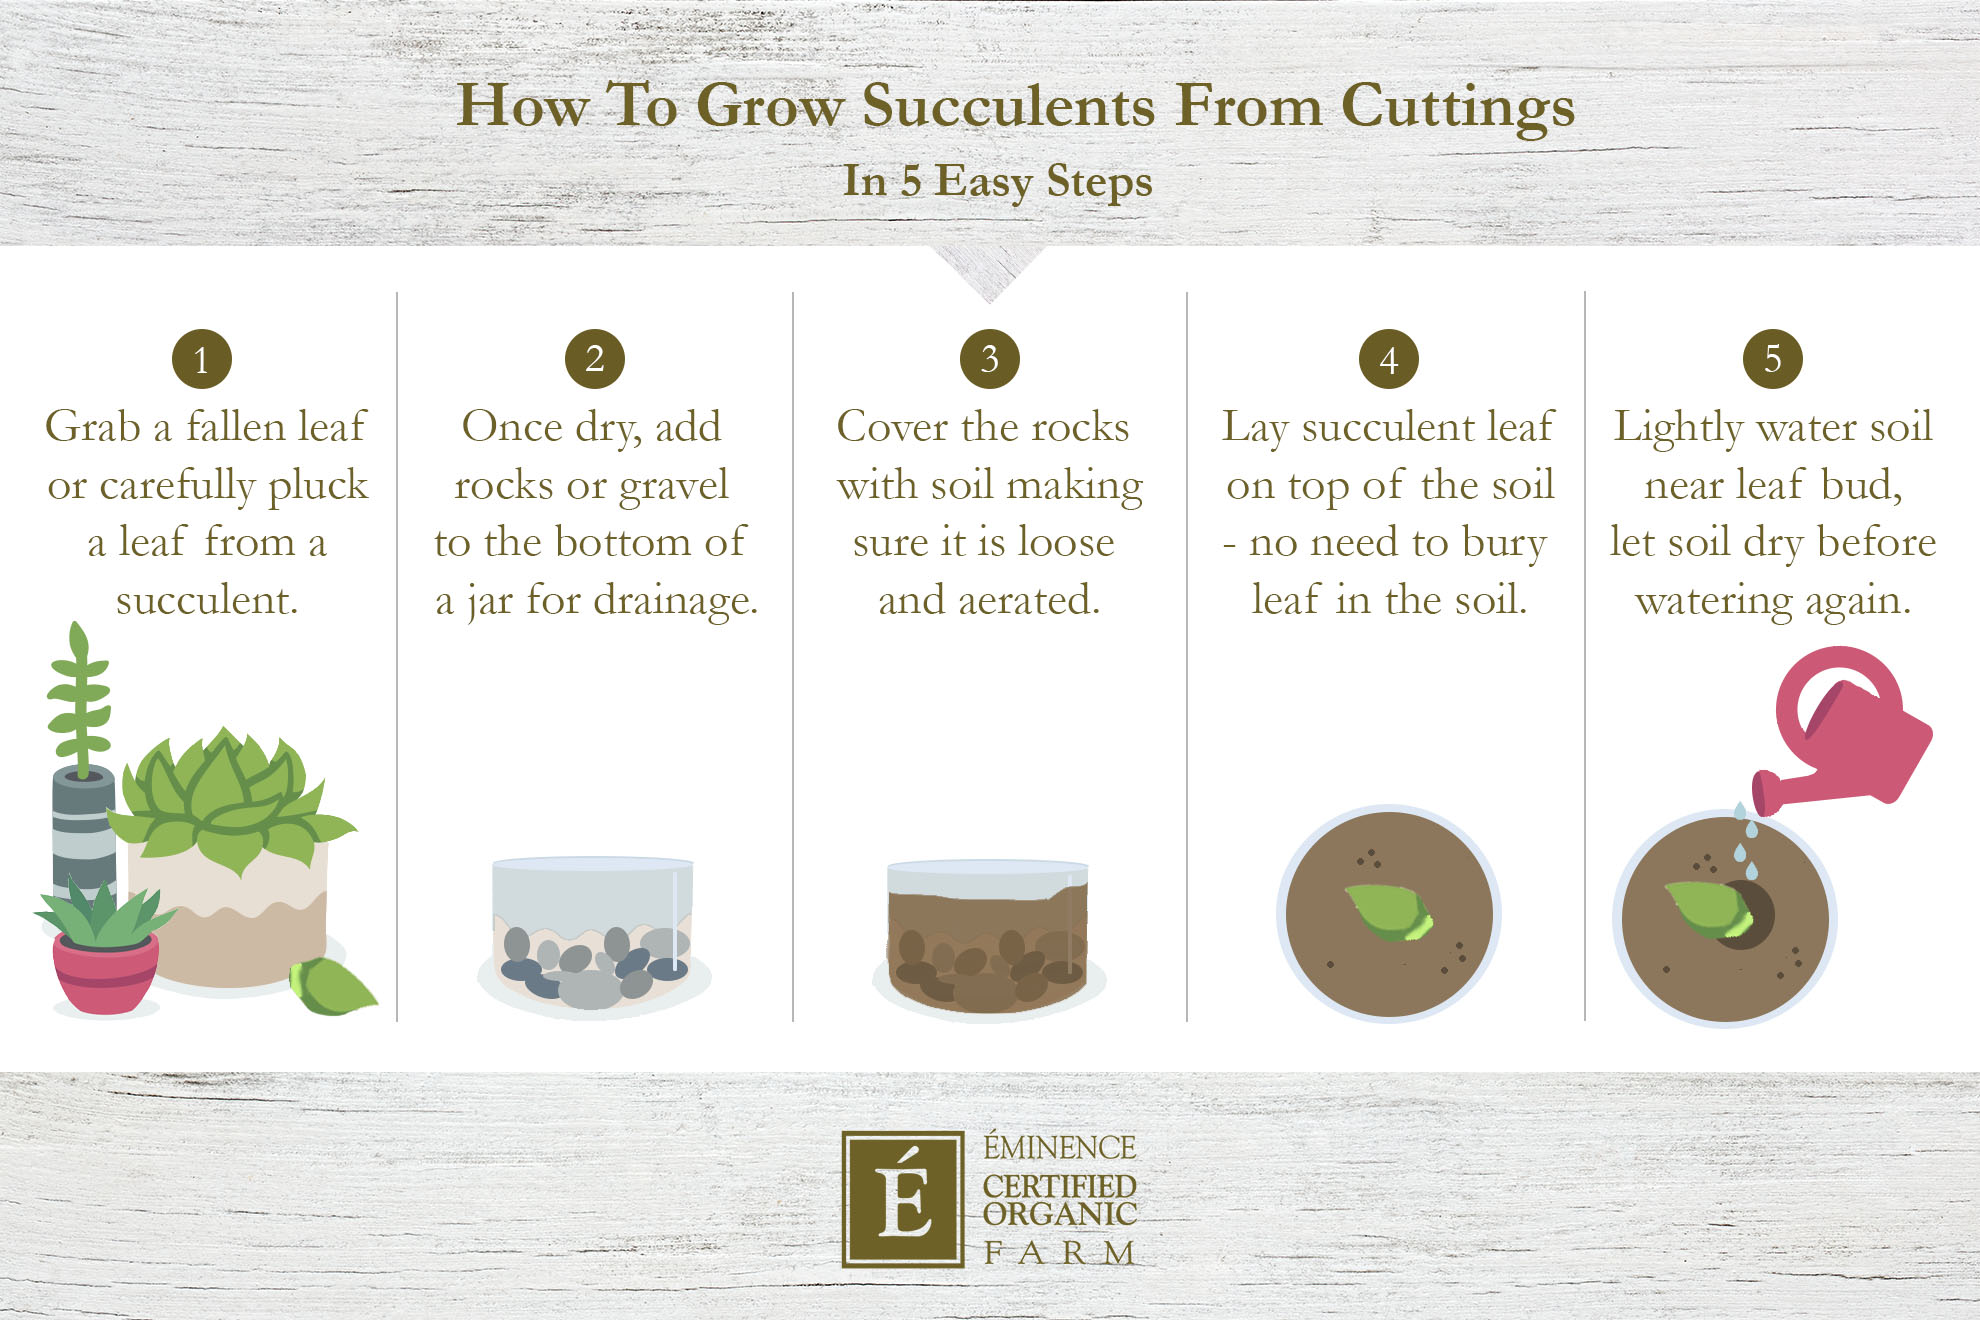 Eminence Certified Organic Farm: How to grow succulents from cuttings